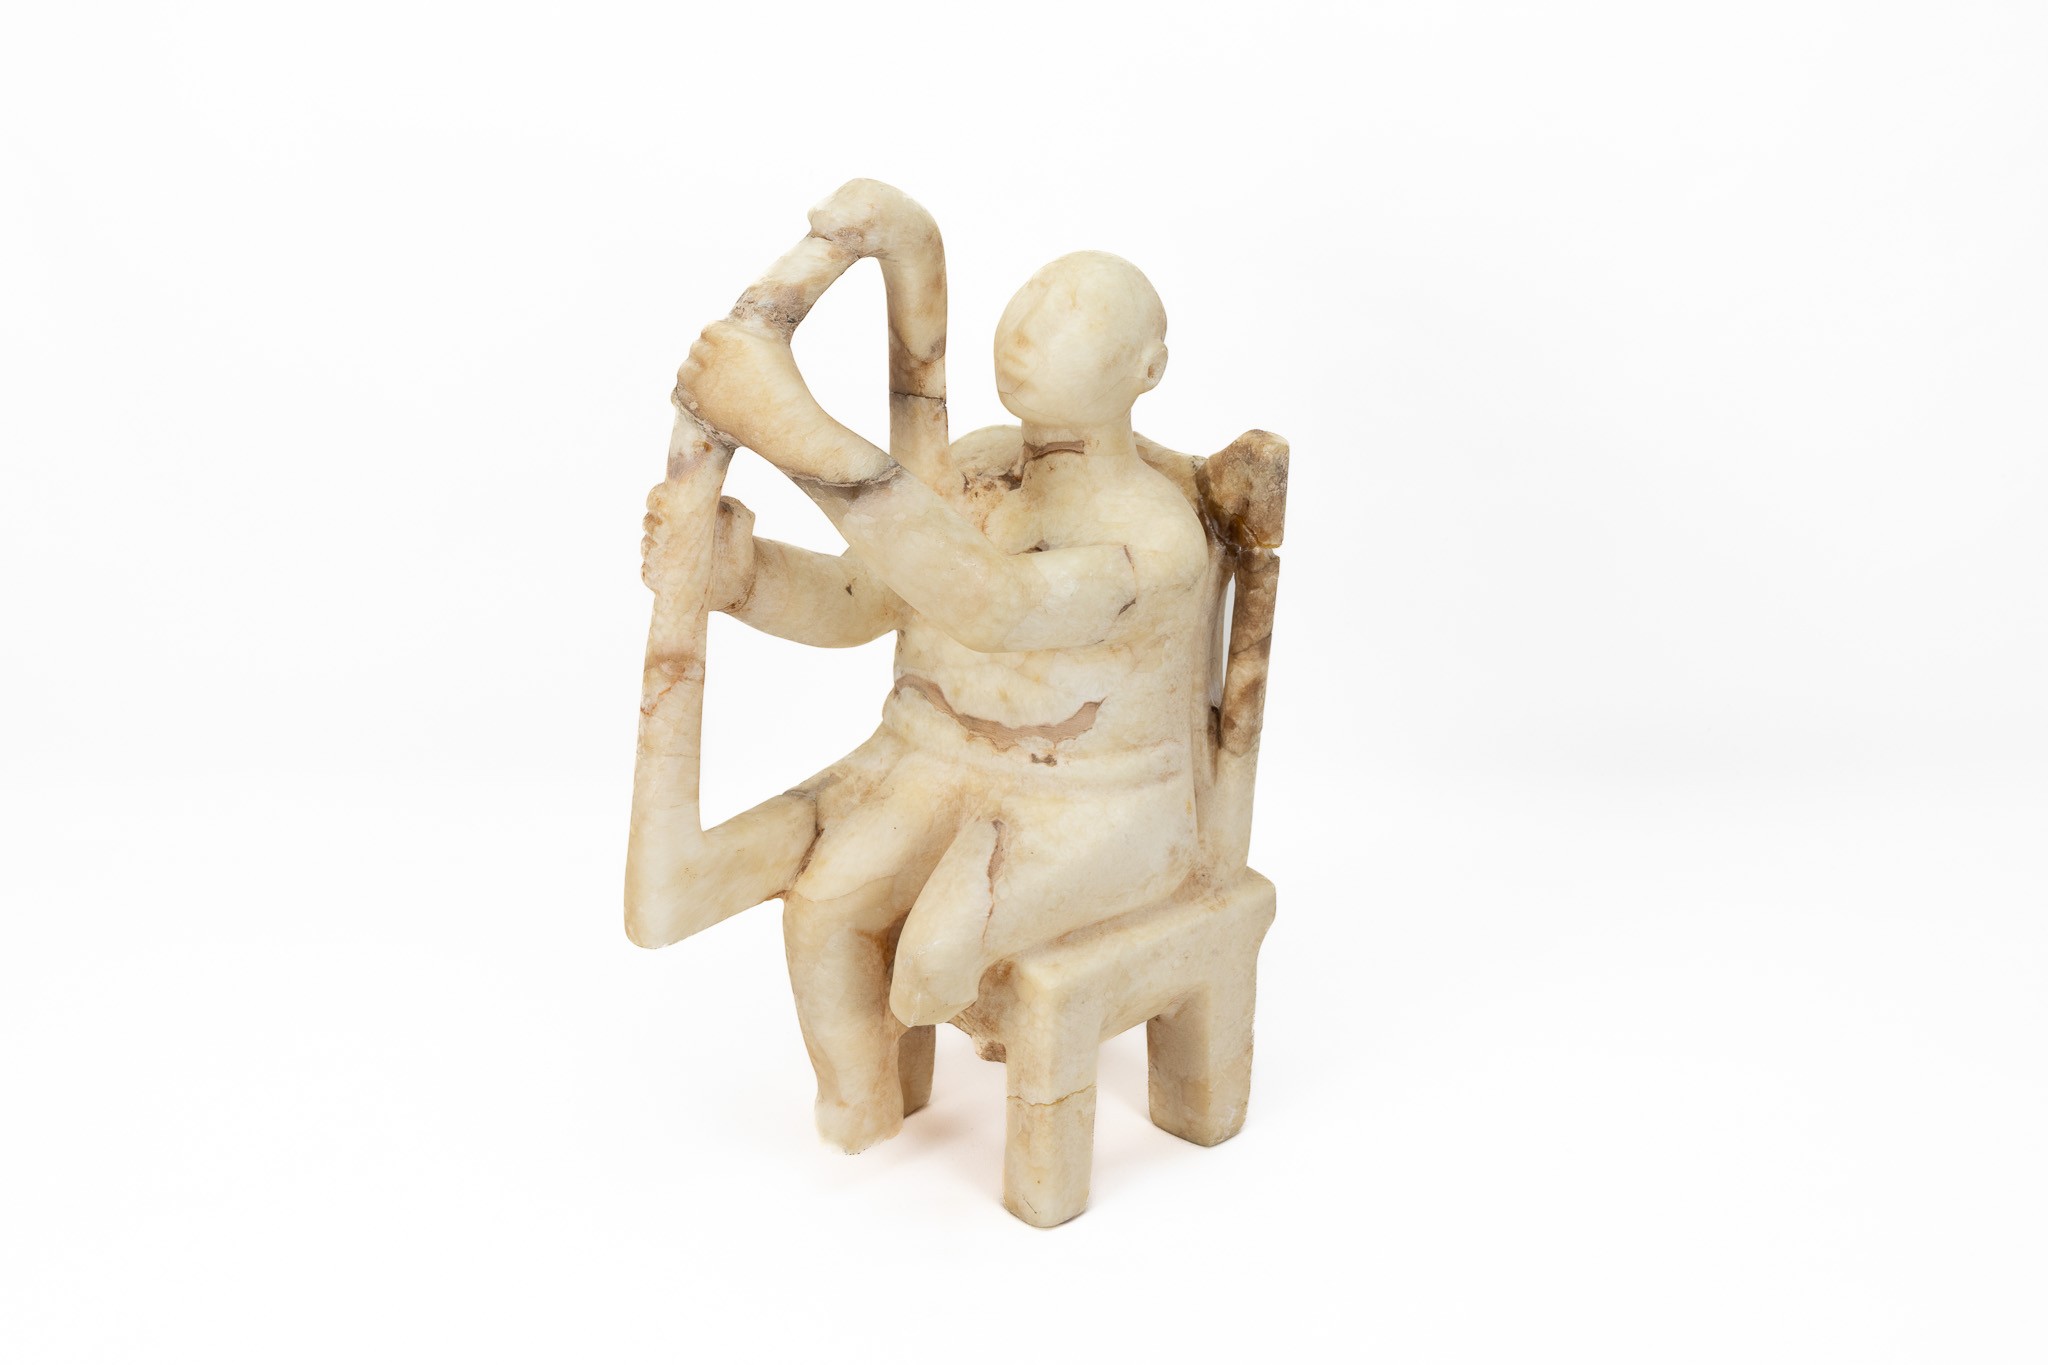 A White Marble Seated Musician in the Style of the 3rd Millennium B.C of the Cyclonic Period.

H: Ap